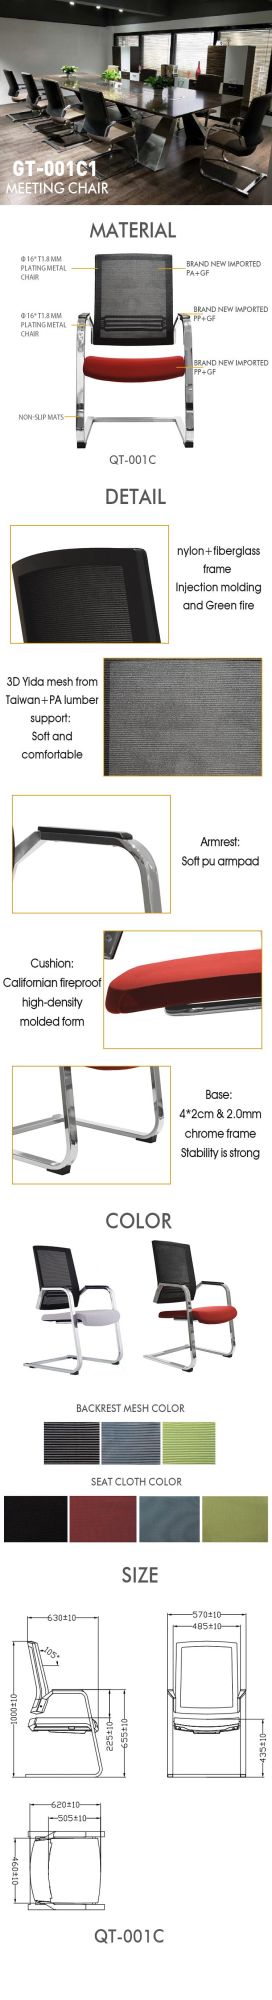 with Armrest Modern Huy Stand Export Packing Hotel Furniture Office Chair